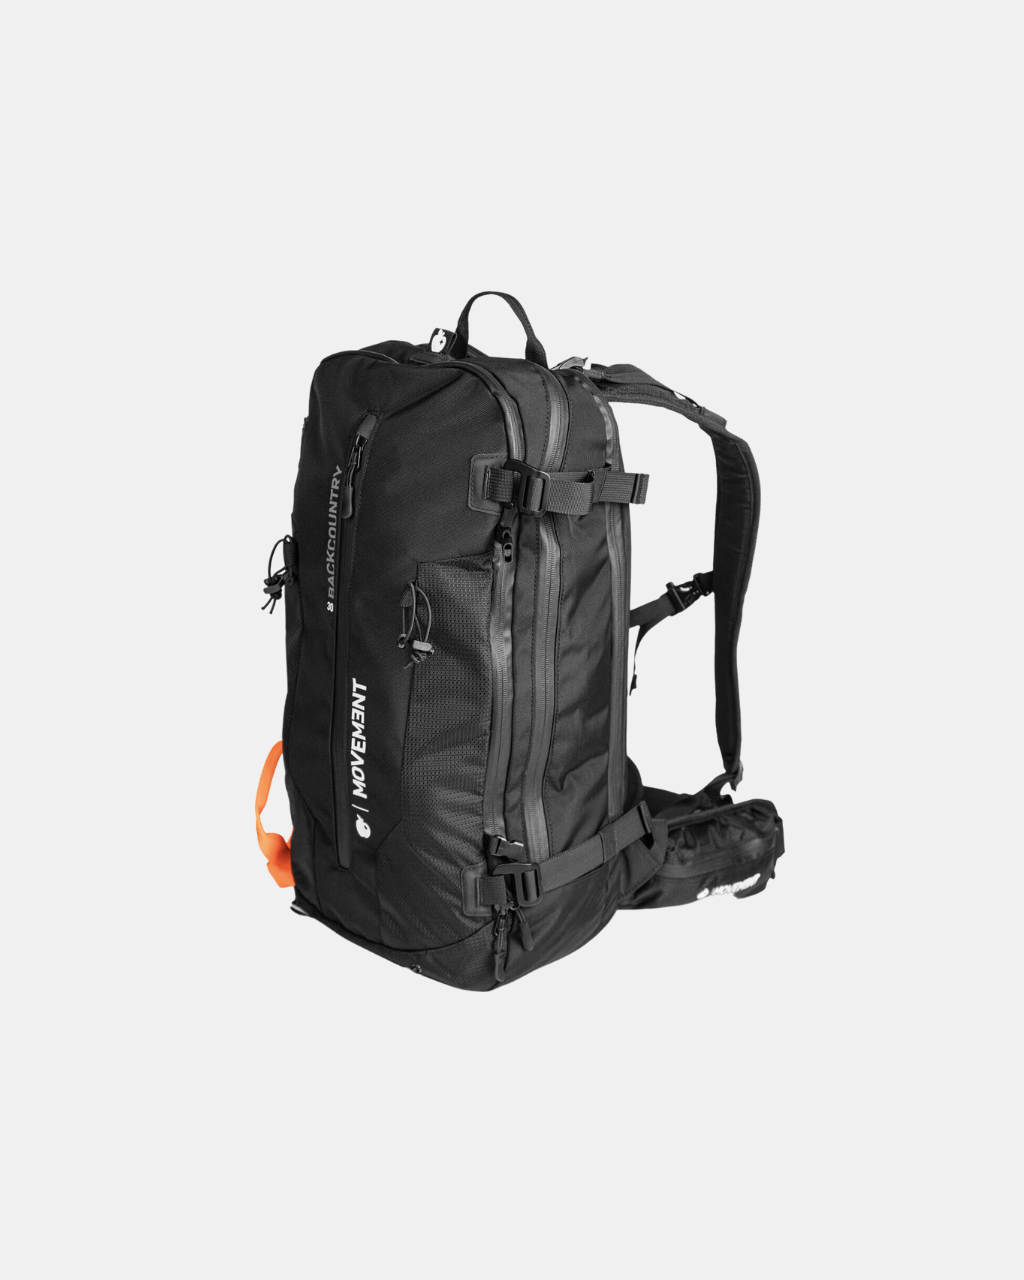 Experience Movement&#39;s design and functionality through the Backcountry backpack.